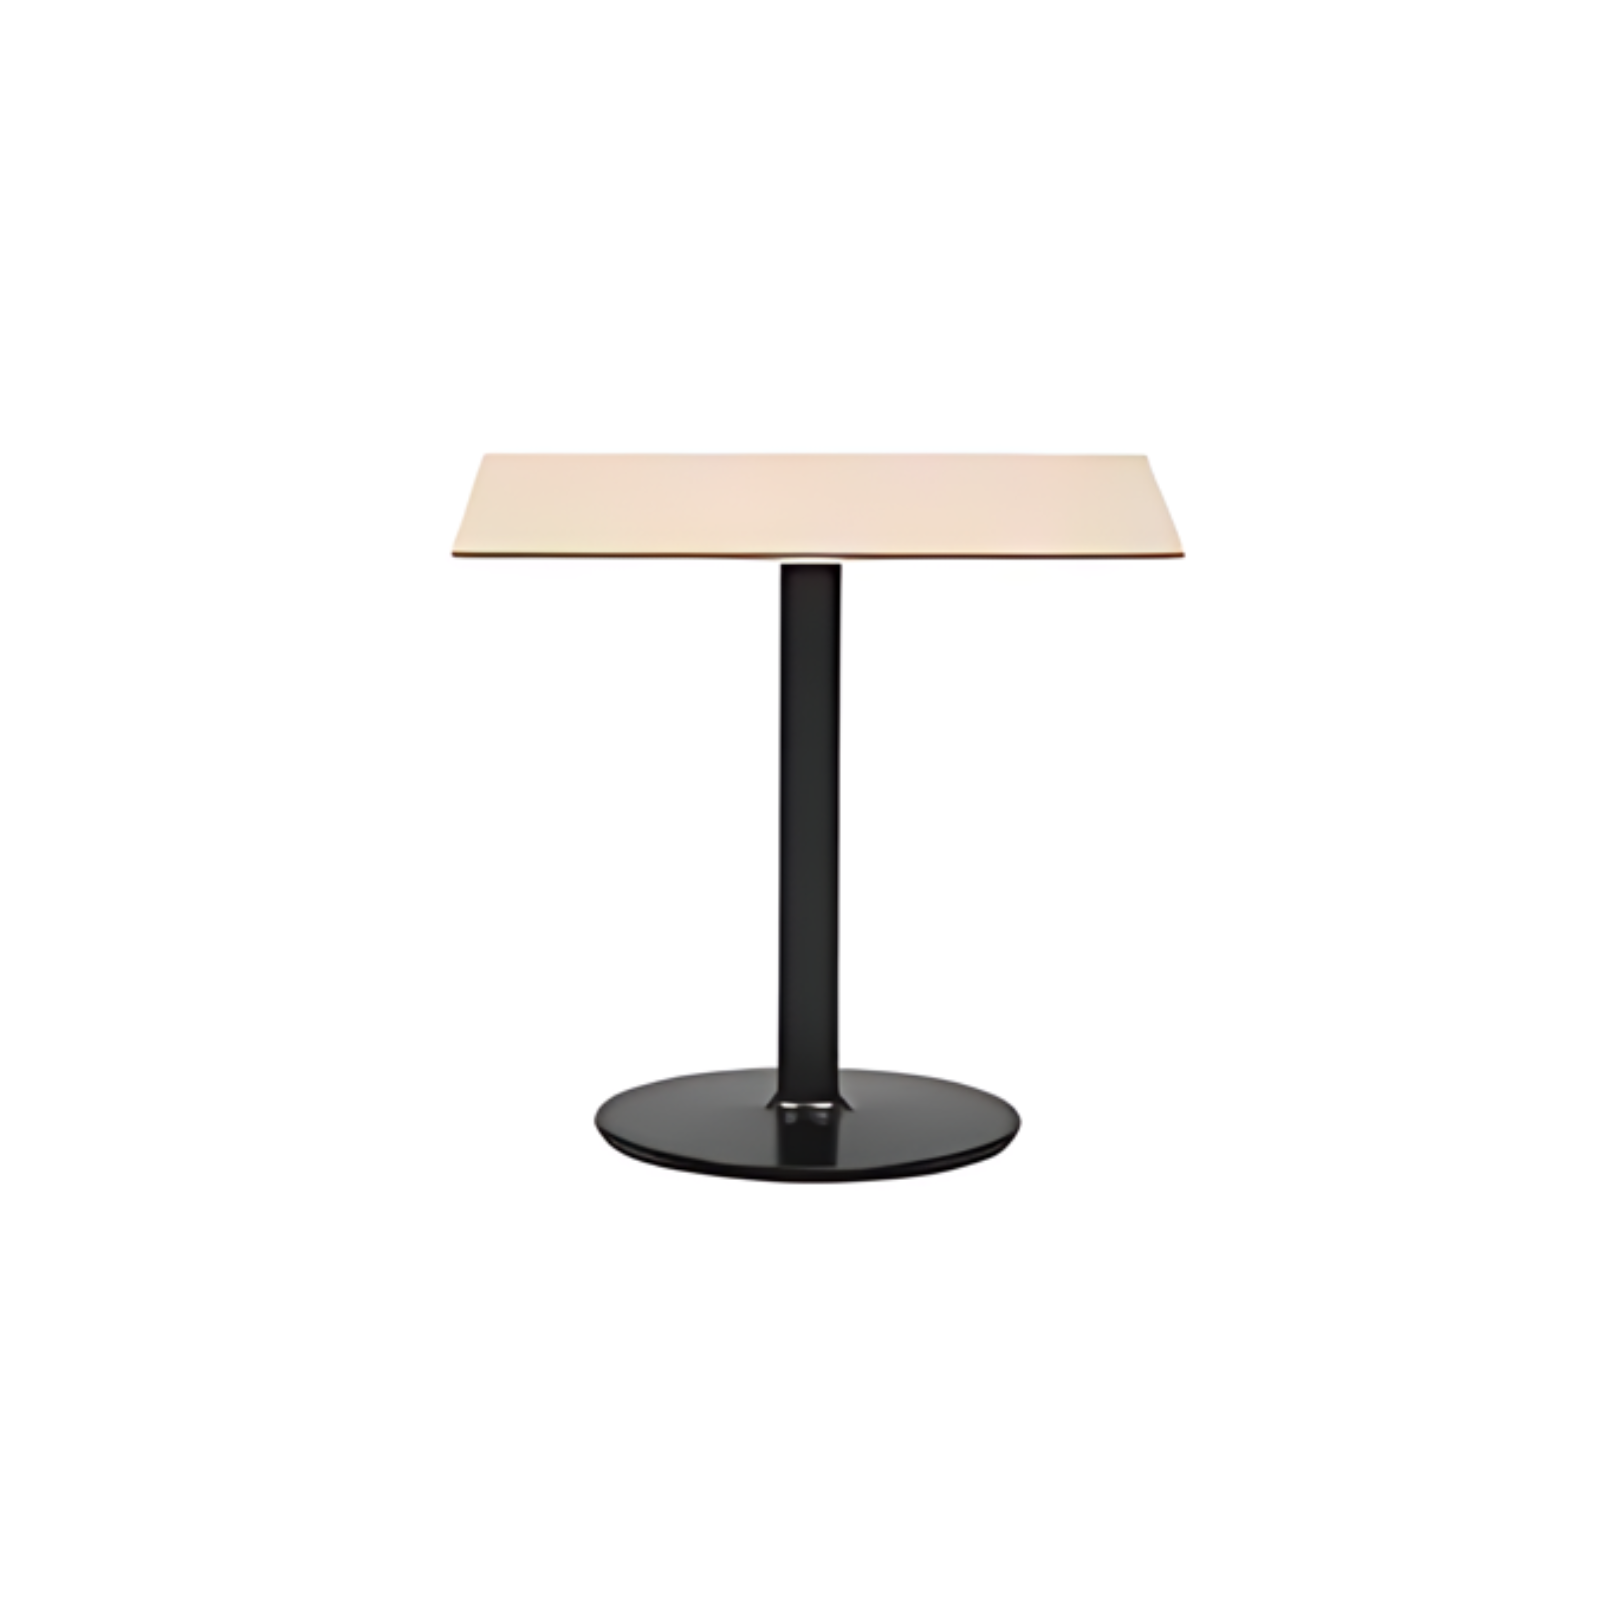 DUAL DINING TABLE BASE